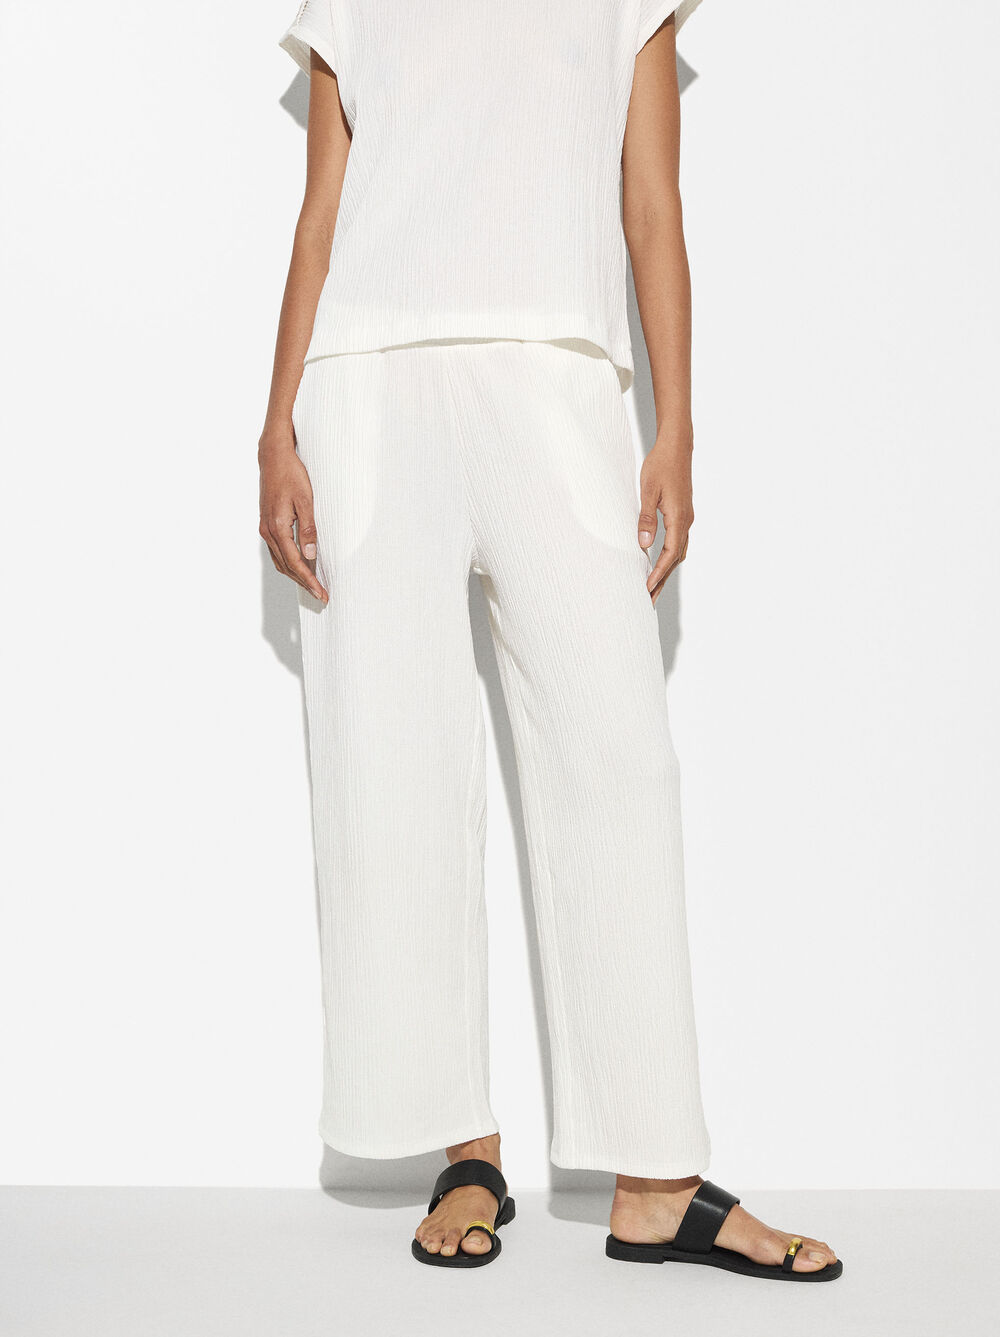 Textured Pants With Elastic Waistband image number 3.0